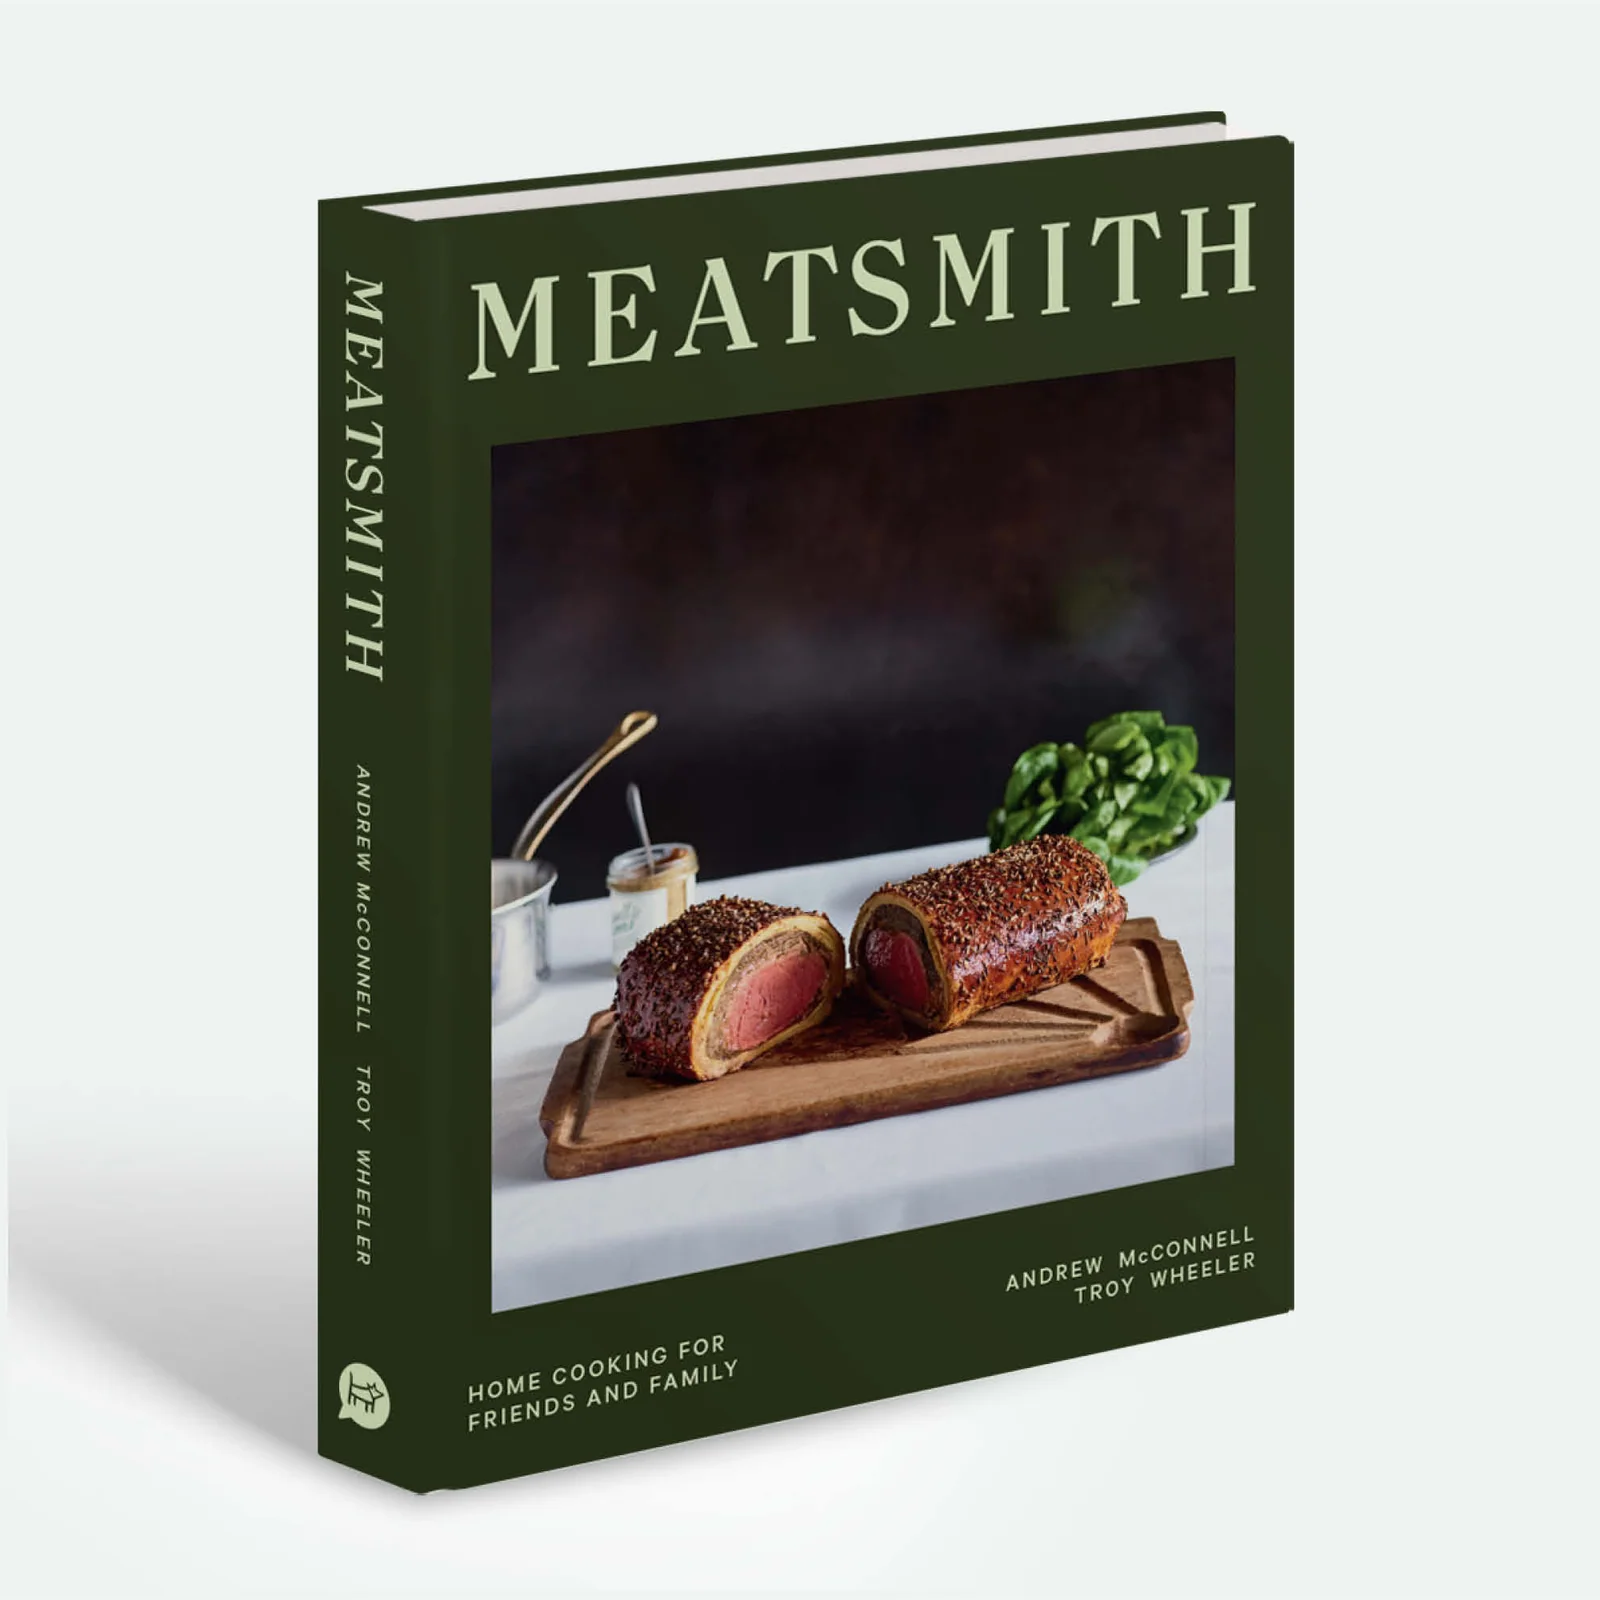 Meatsmith by Andrew McConnell &amp; Troy Wheeler